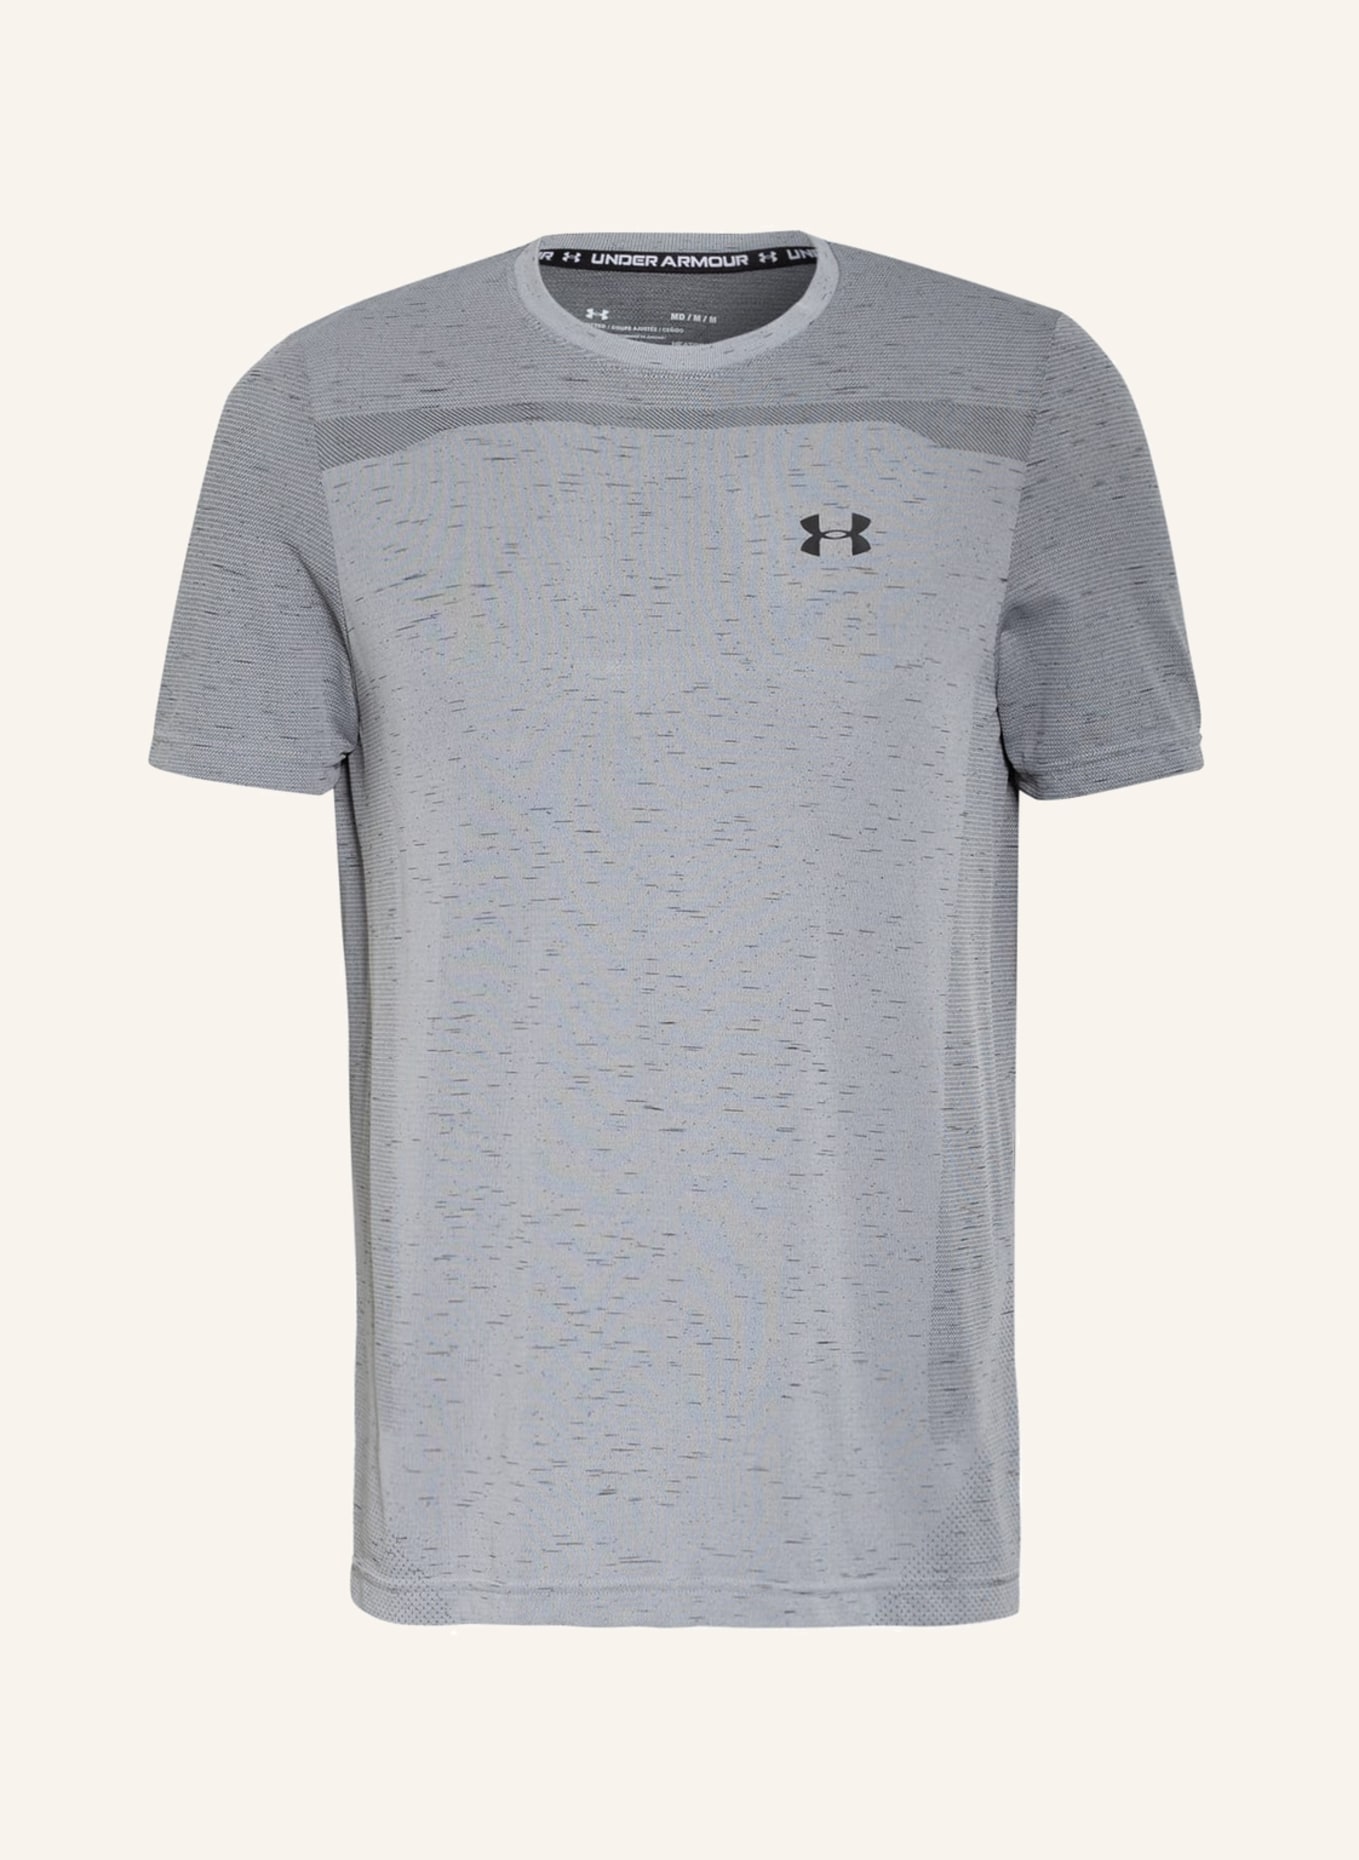 UNDER ARMOUR T-shirt, Color: GRAY/ DARK GRAY (Image 1)